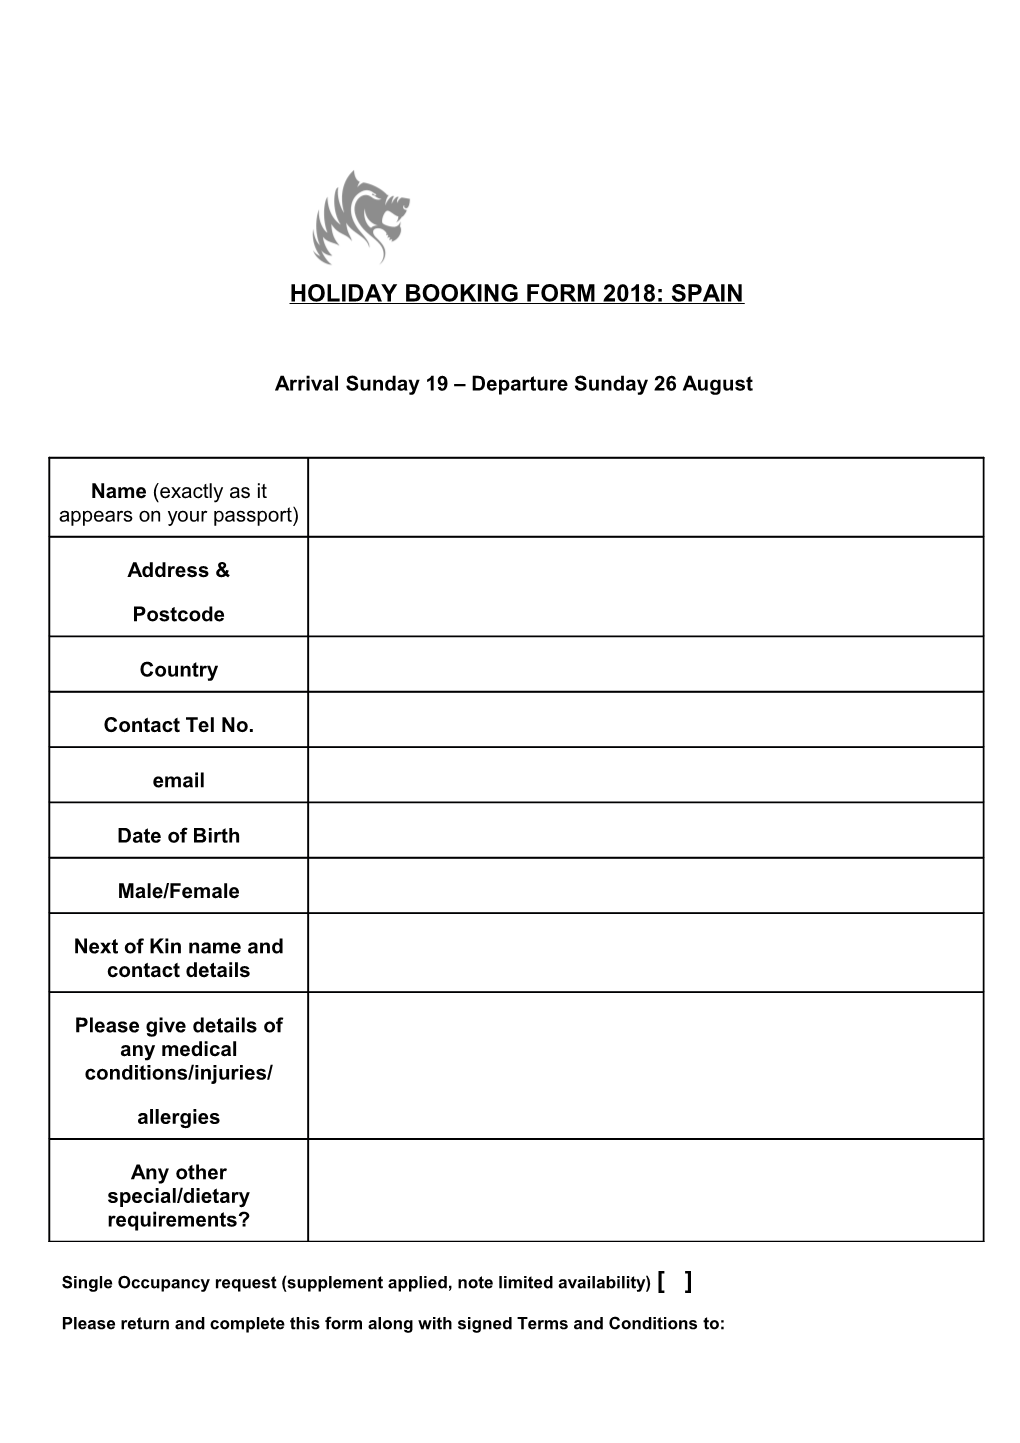 Holiday Booking Form 2018: Spain